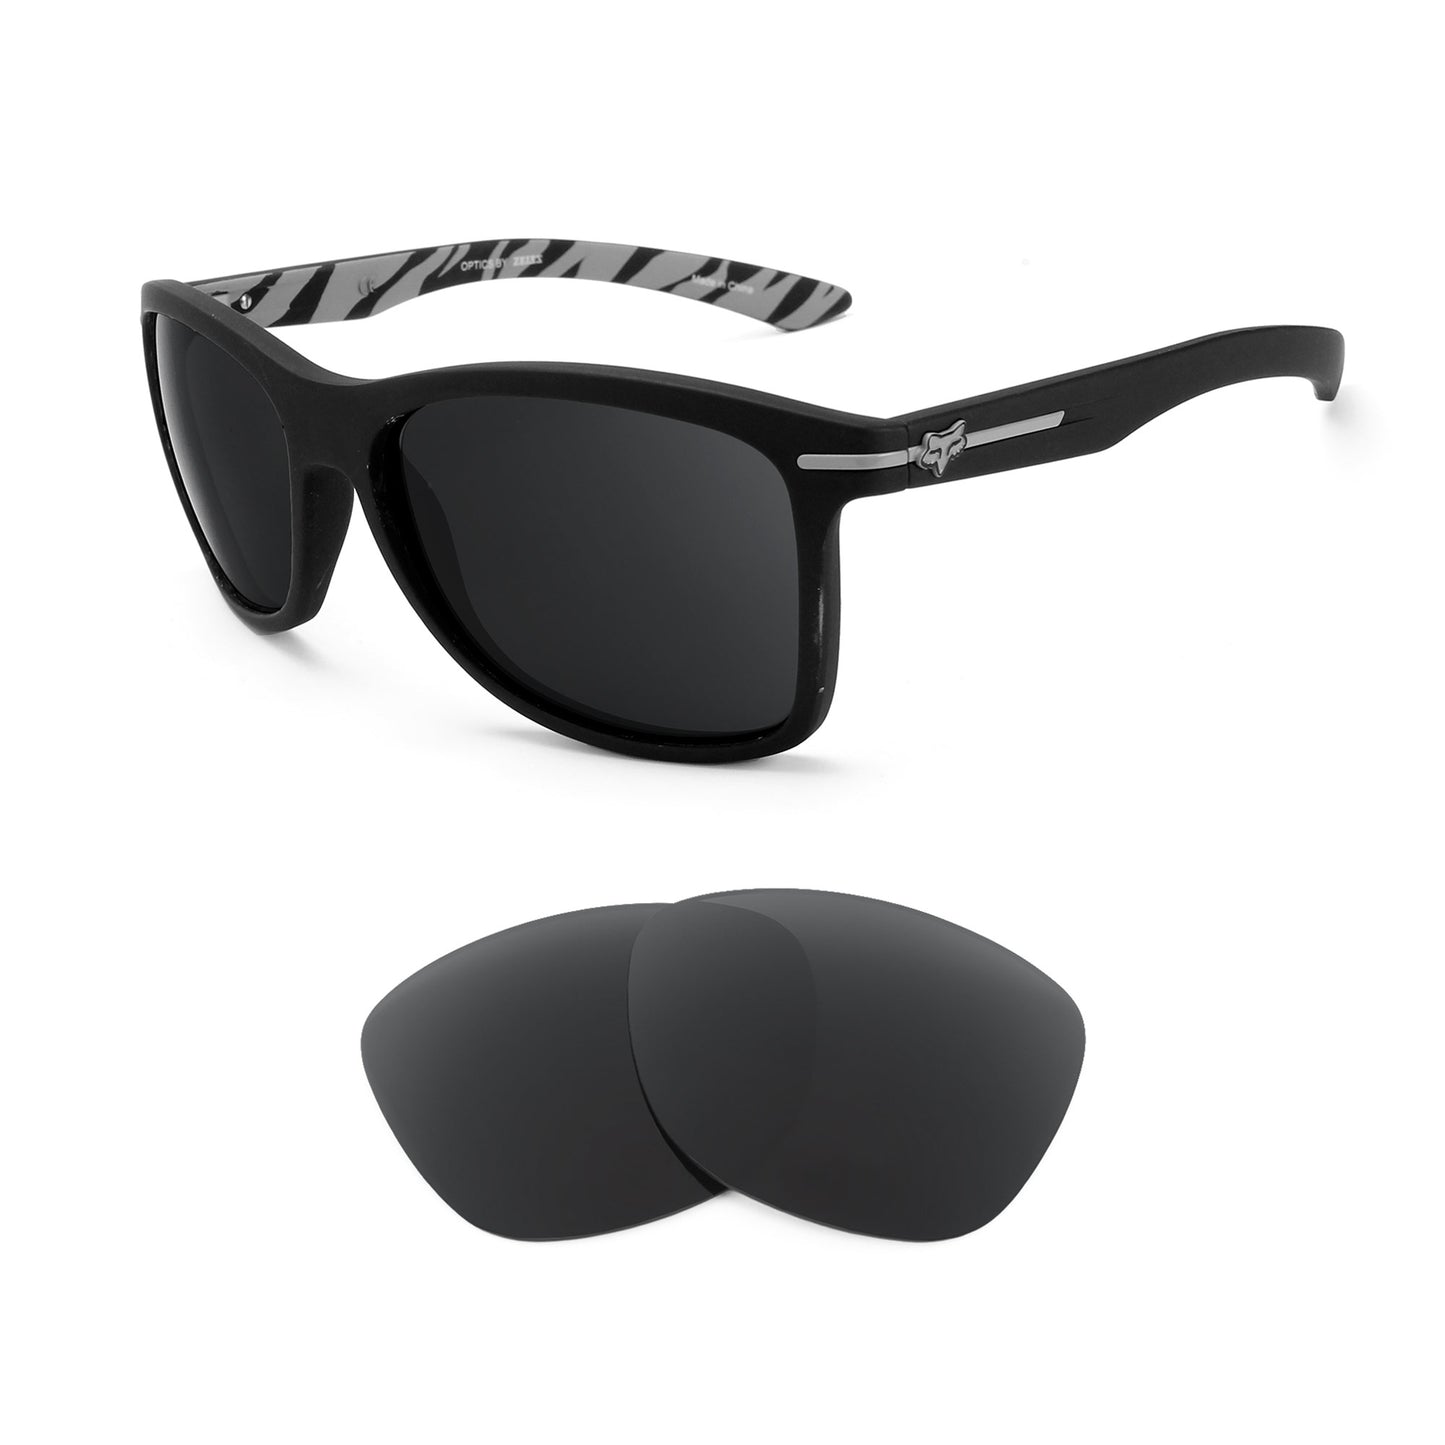 Fox Racing The Double Deuce sunglasses with replacement lenses